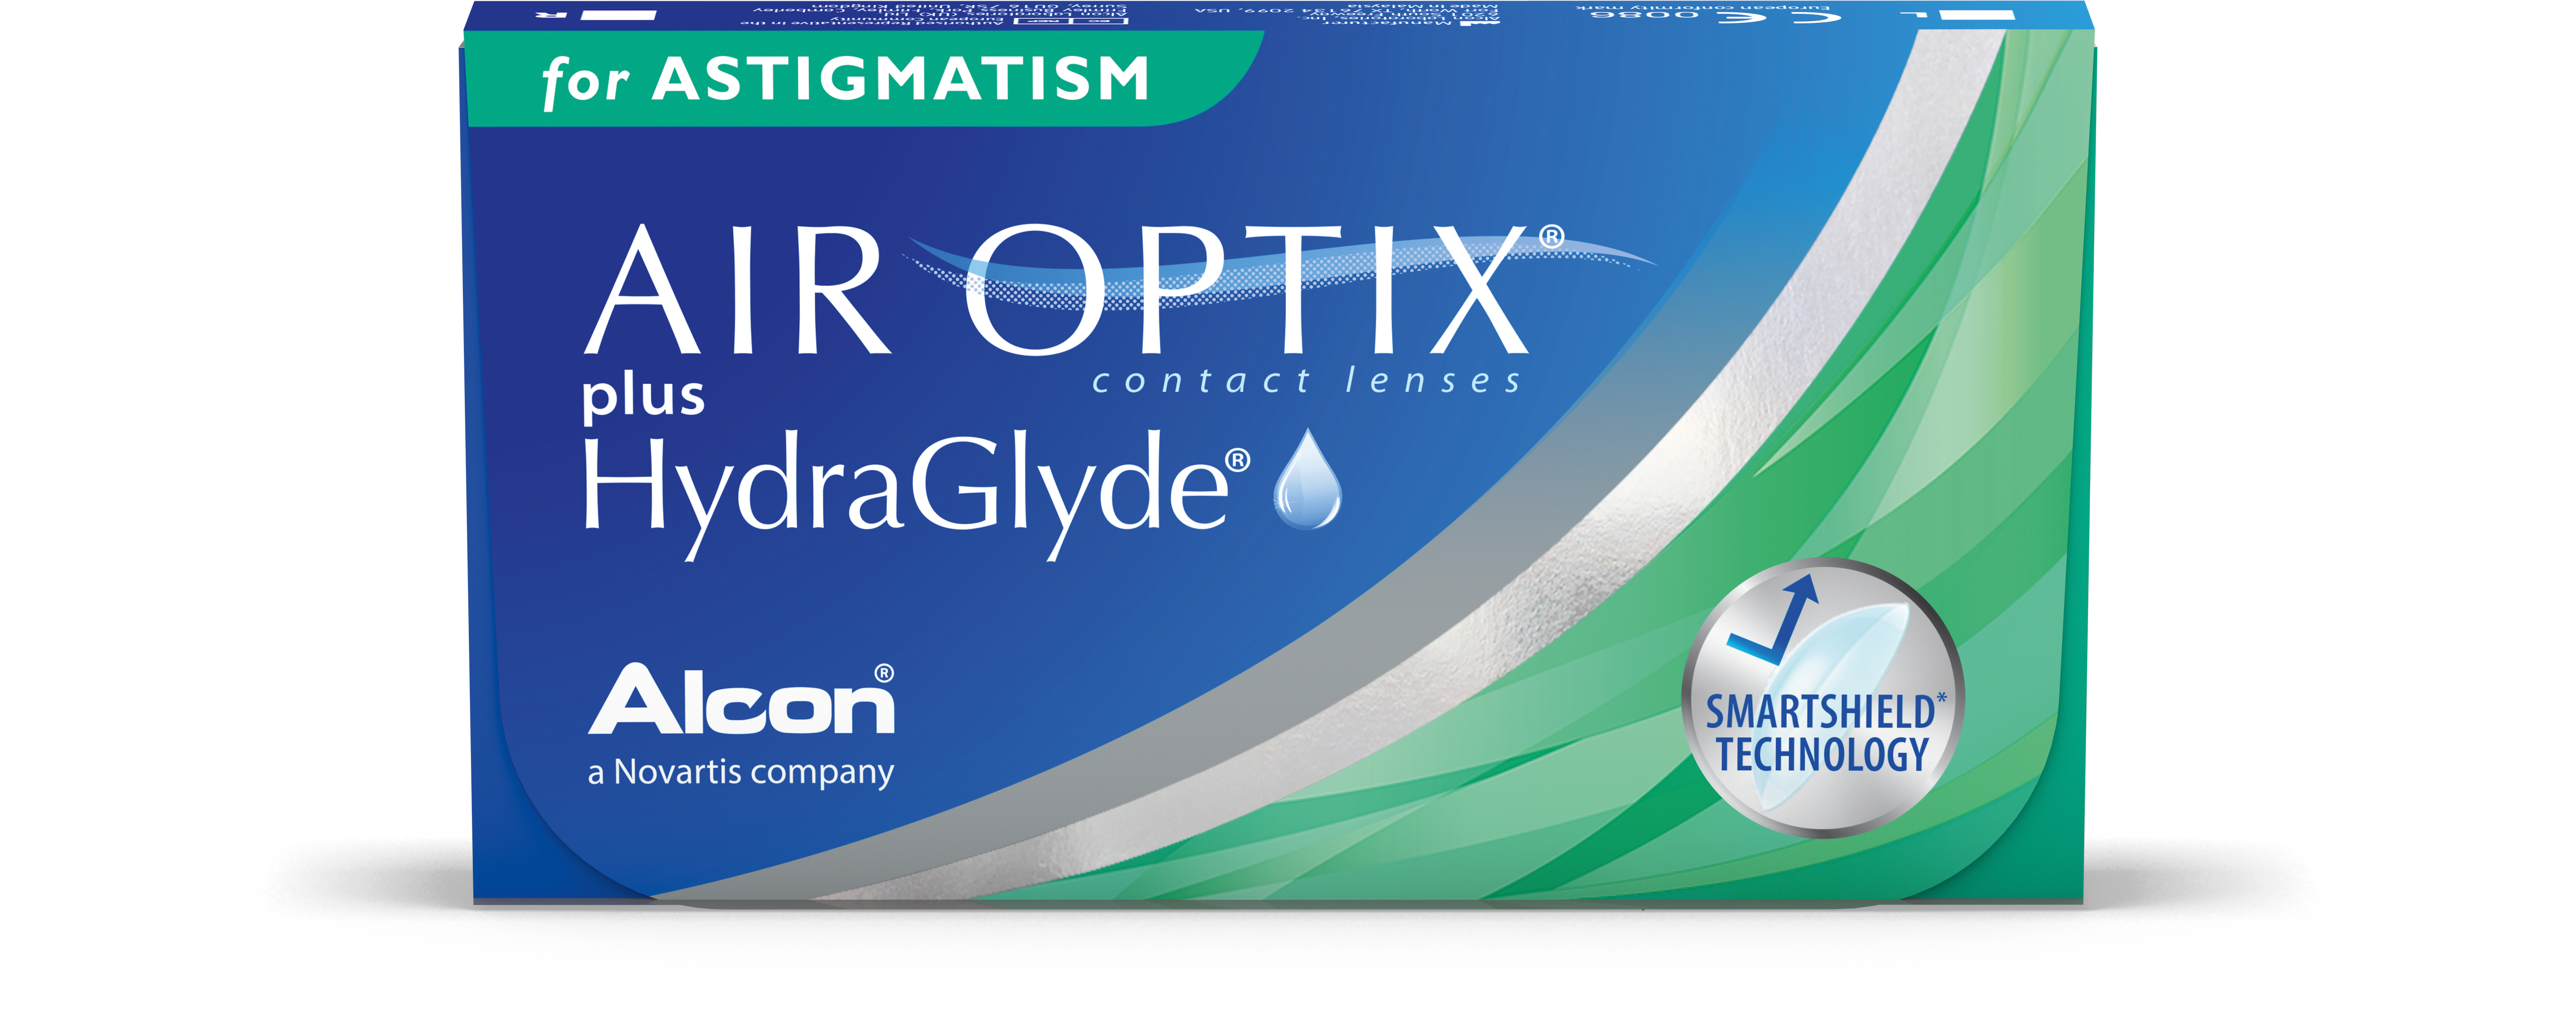 Air Optix for Astigmatism with Hydraglyde